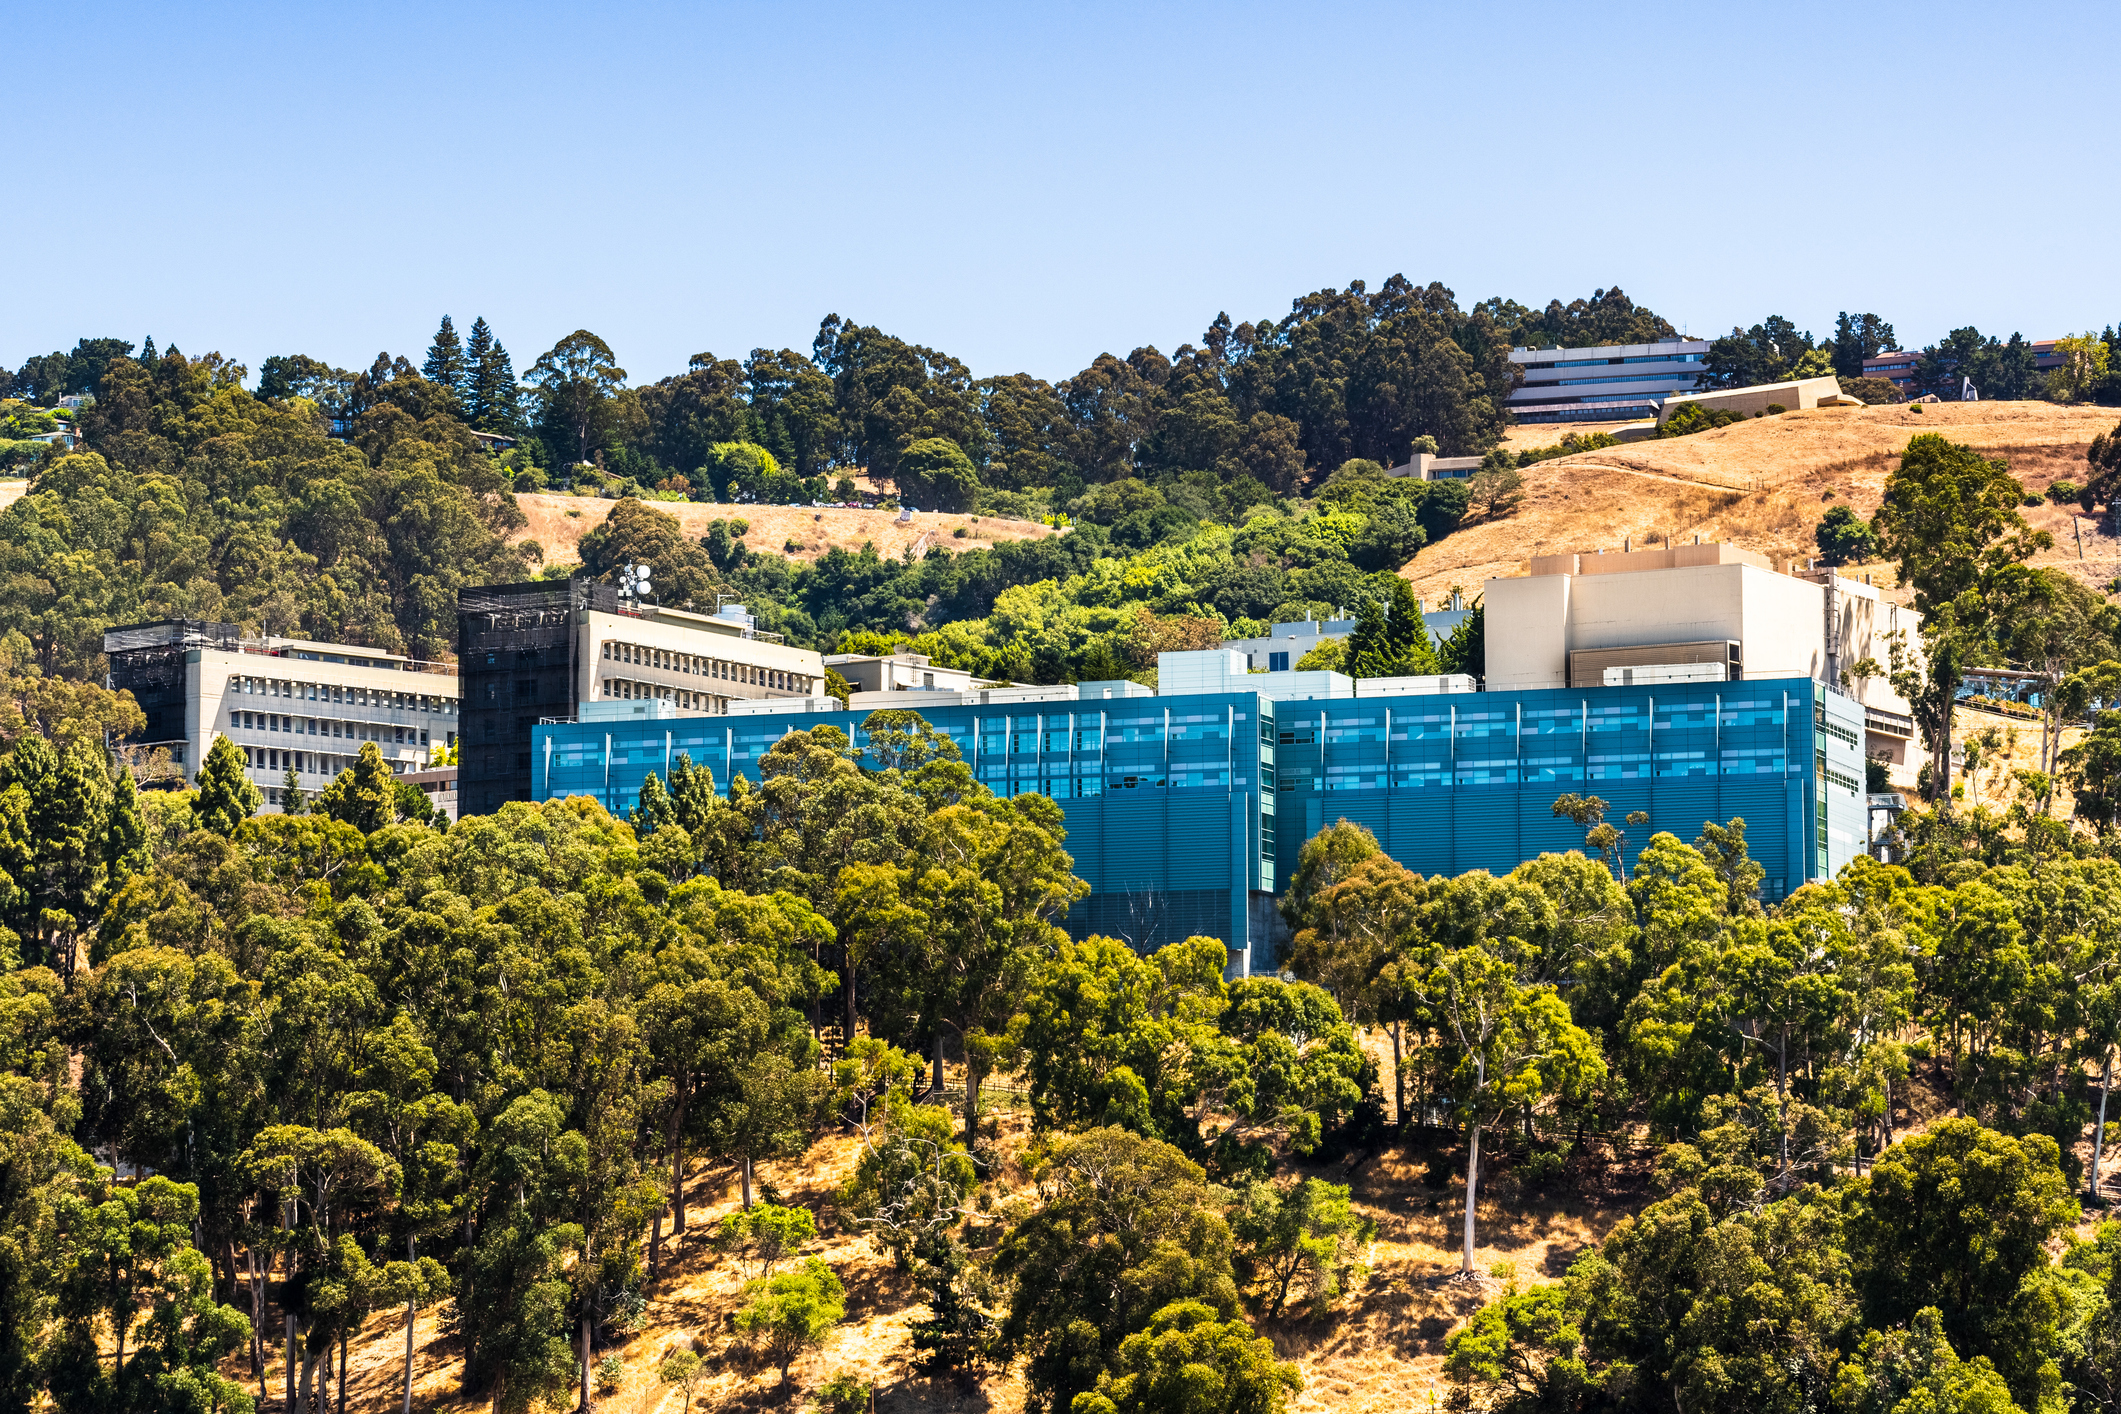 Lawrence Berkeley National Labs – Berkeley, CA – NERSC Facility Upgrade (N-9 Expansion)